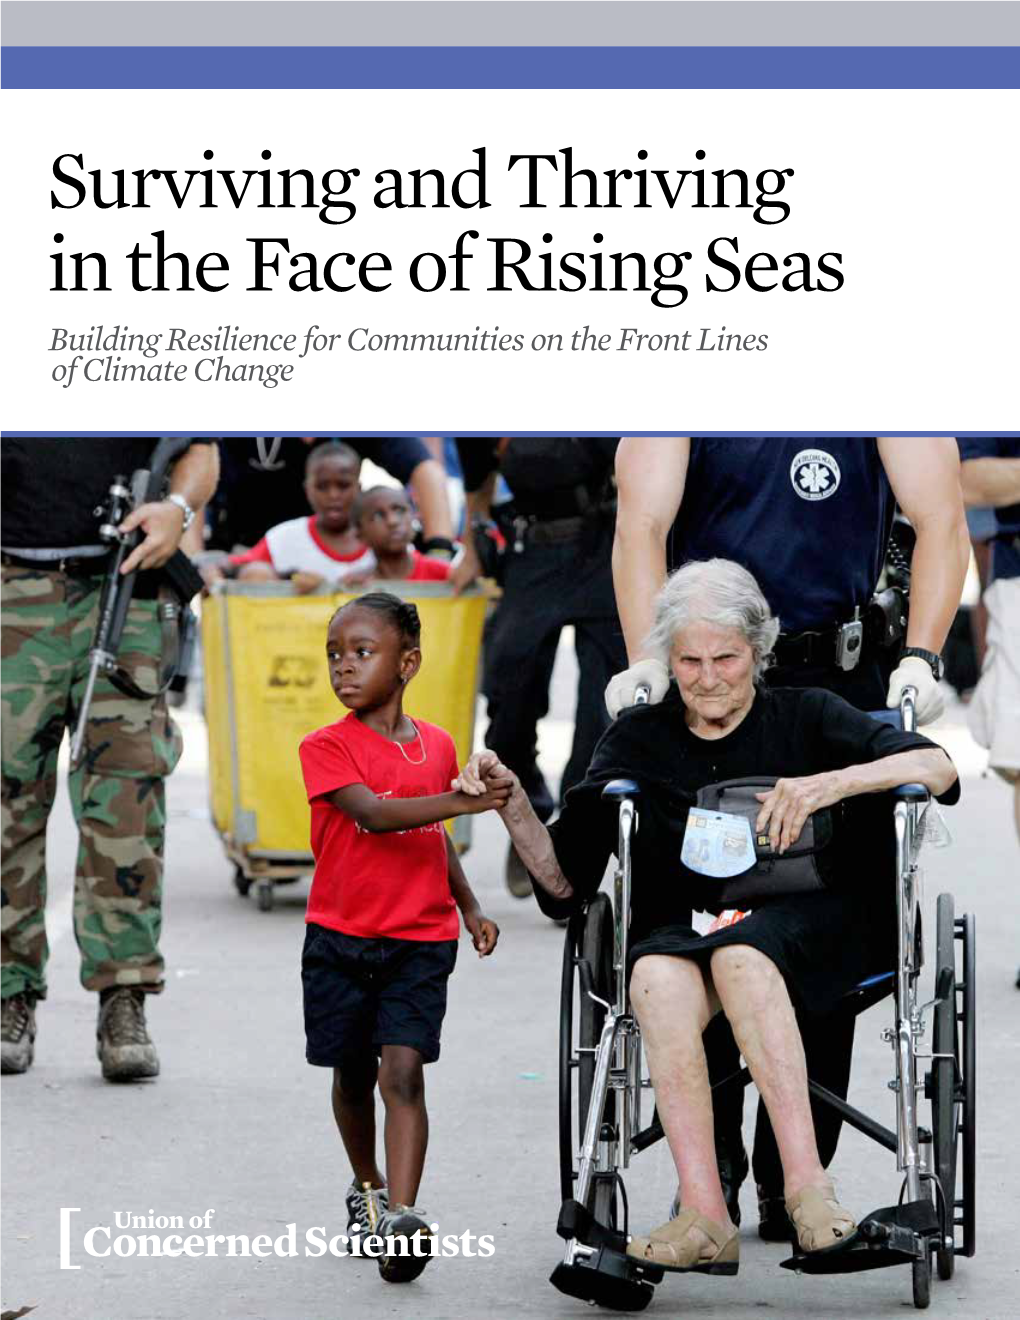 Surviving and Thriving in the Face of Rising Seas (2015) -- Full Report